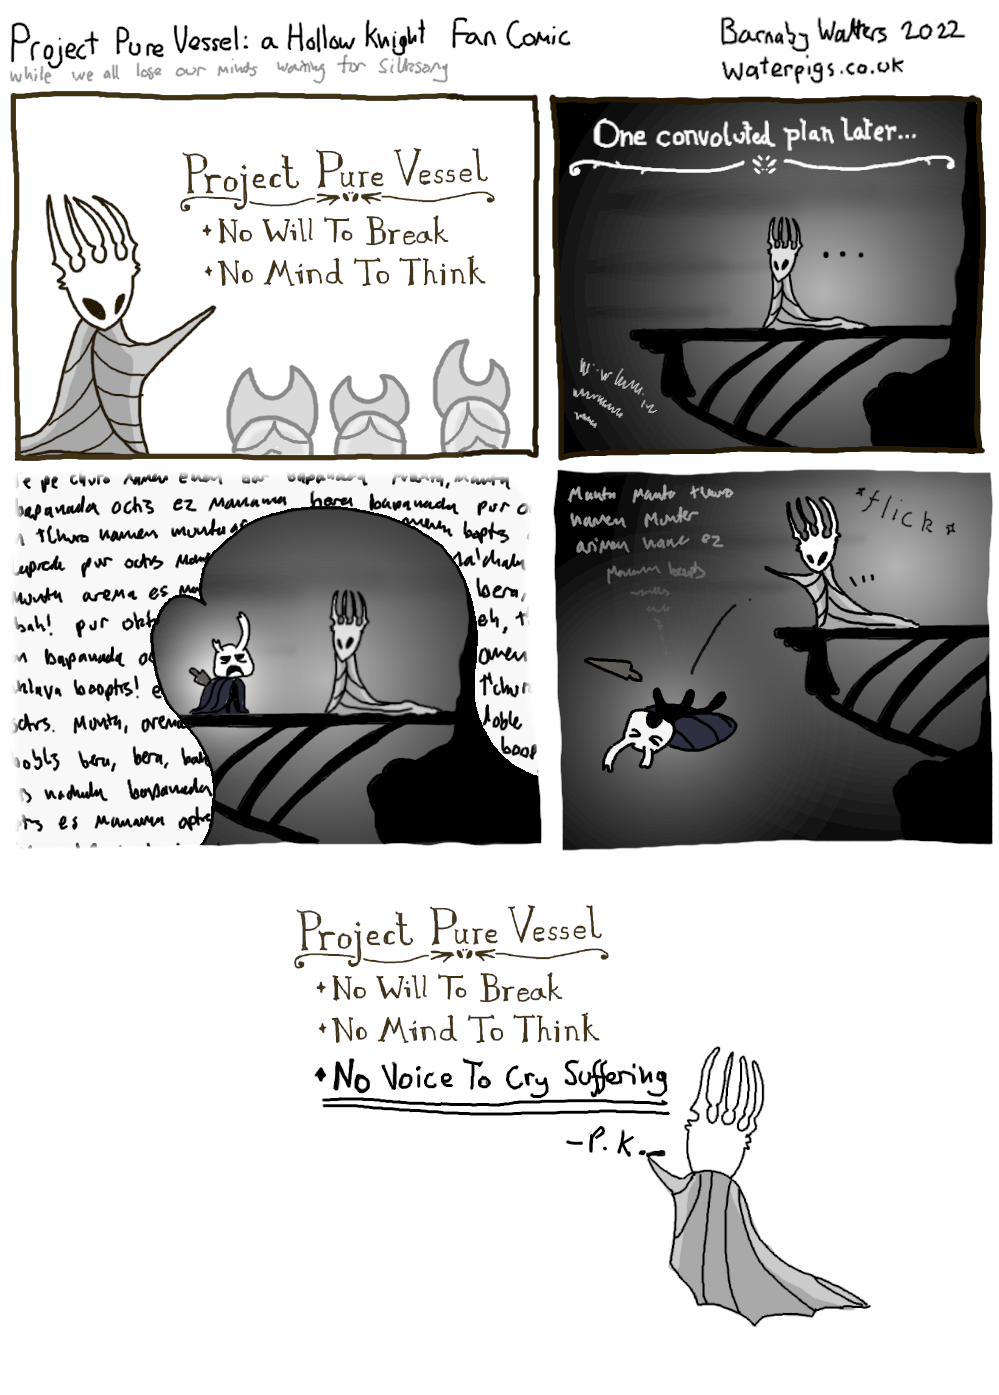 Project Pure Vessel: a Hollow Knight Fan Comic. First panel: The pale king gives a presentation to some attendants, and gestures to a slide with the text “Project Pure Vessel: 1. No Will to break. 2. No mind to think. Second Panel: one convoluted plan later, the pale king waits at the abyss entrance for a pure vessel to ascend. Third panel: out of the abyss jumps a vessel, one horn shorter than the other. It starts to speak, and its nonsense fills the screen. It’s Zote the Mighty. Fourth panel: bored of precepts, the pale king yeets Zote back into the abyss. Fifth panel: The pale king amends the original presentation slide with a third requirement: No Voice to Cry Suffering.